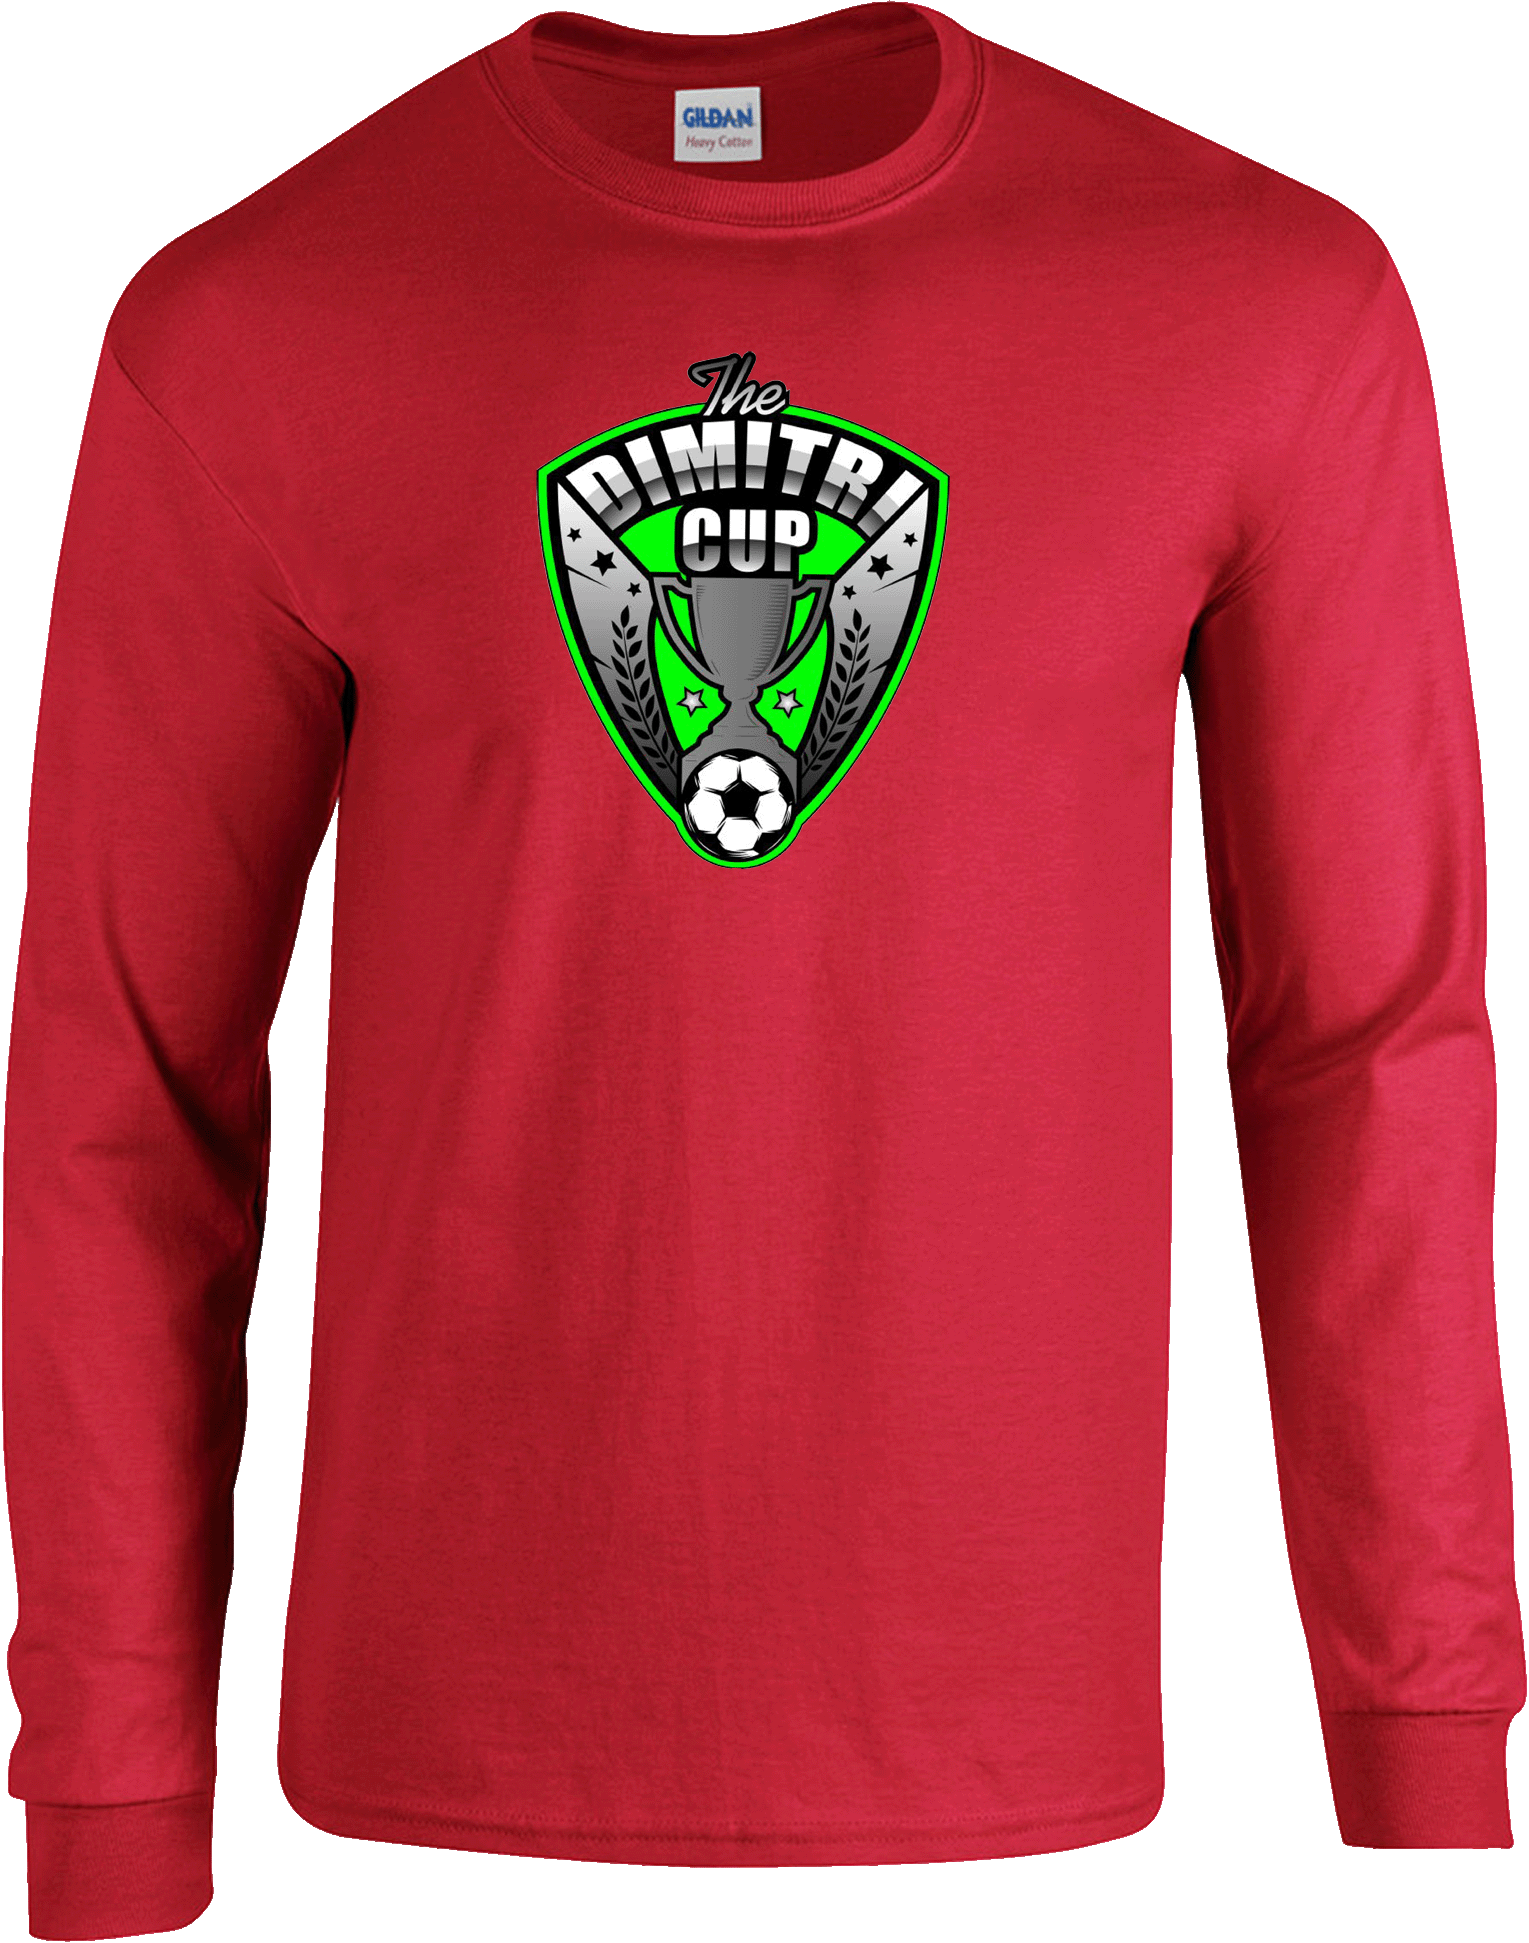 Long Sleeves - 2024 The Dimitri Cup